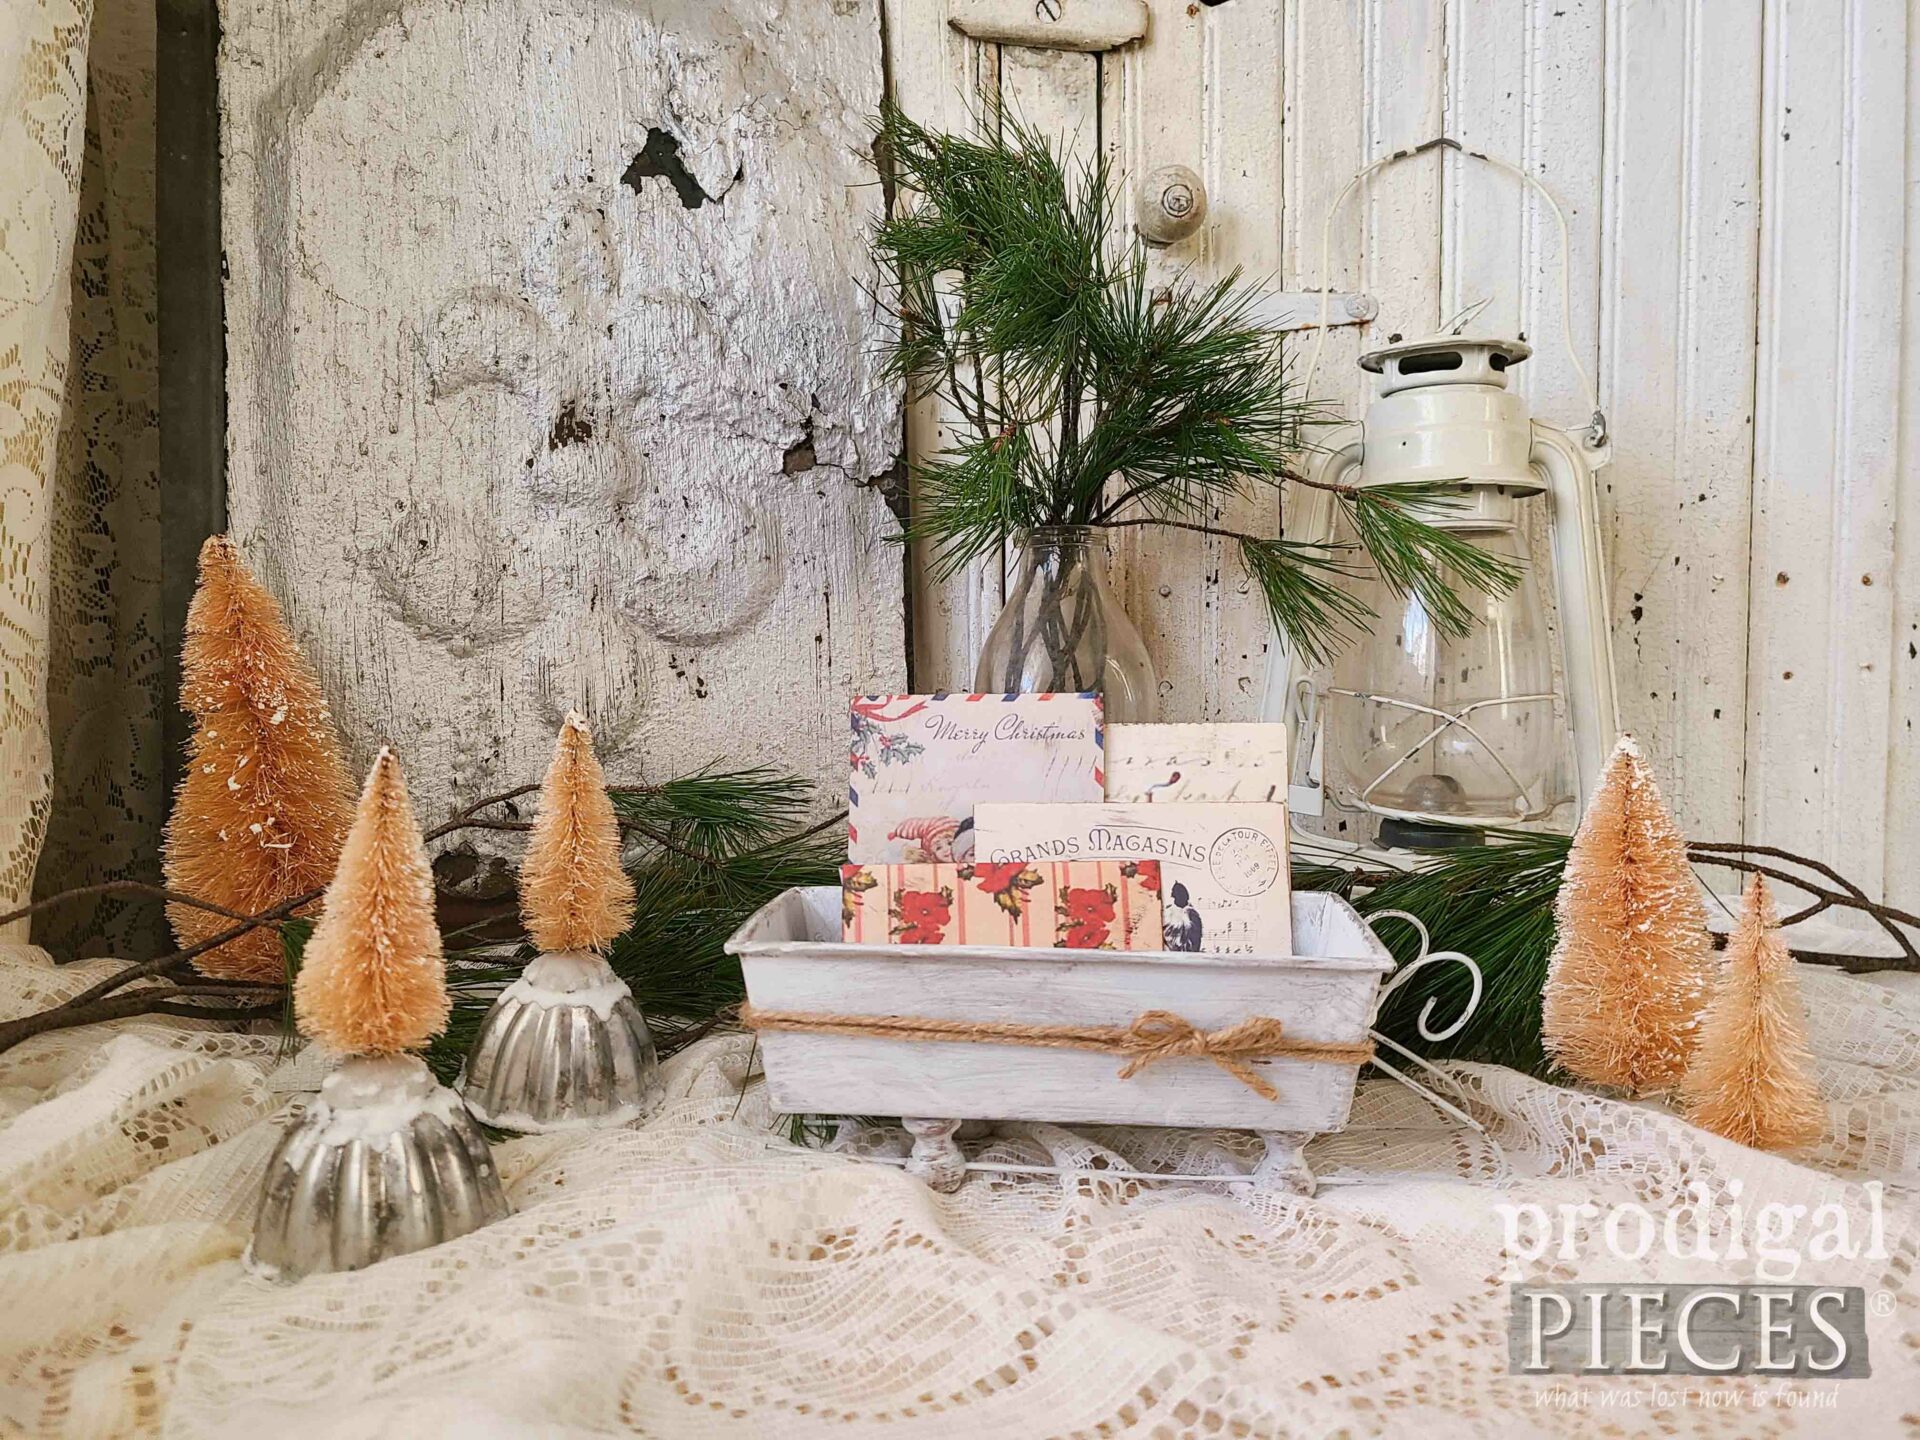 DIY Repurposed Christmas Ornaments for Farmhouse Decor by Larissa of Prodigal Pieces | prodigalpieces.com #prodigalpieces #farmhouse #Christmas